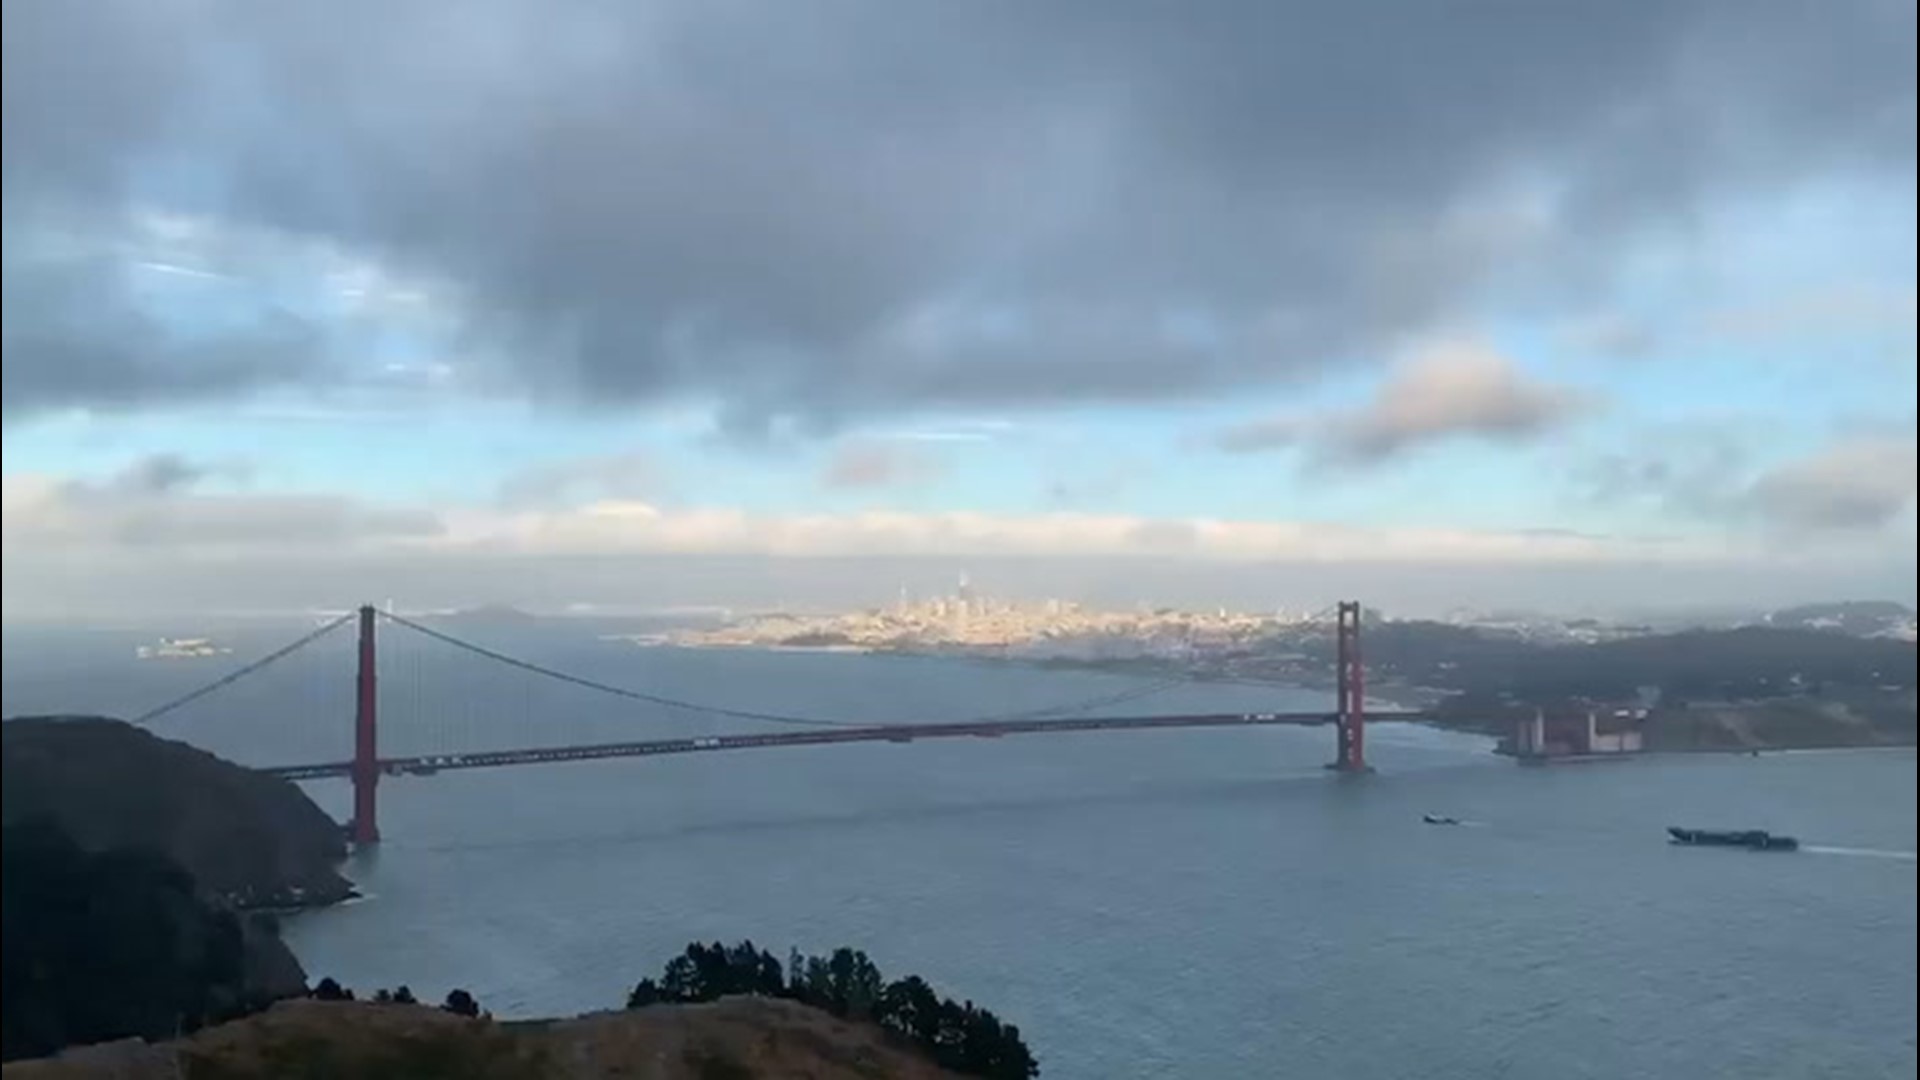 The Golden Gate Bridge in San Francisco, California, made whistling noises on June 5. It came from the bridge railings that mitigate wind loading.